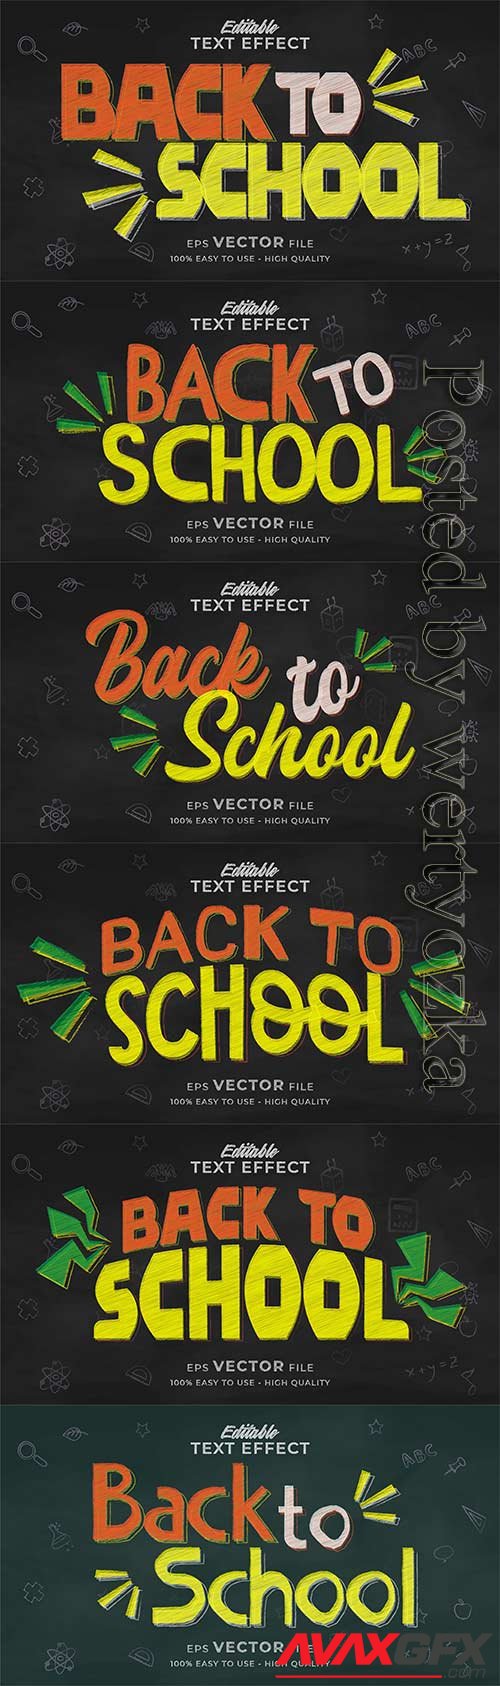 Premium vector Back to school text effect editable chalkboard text style